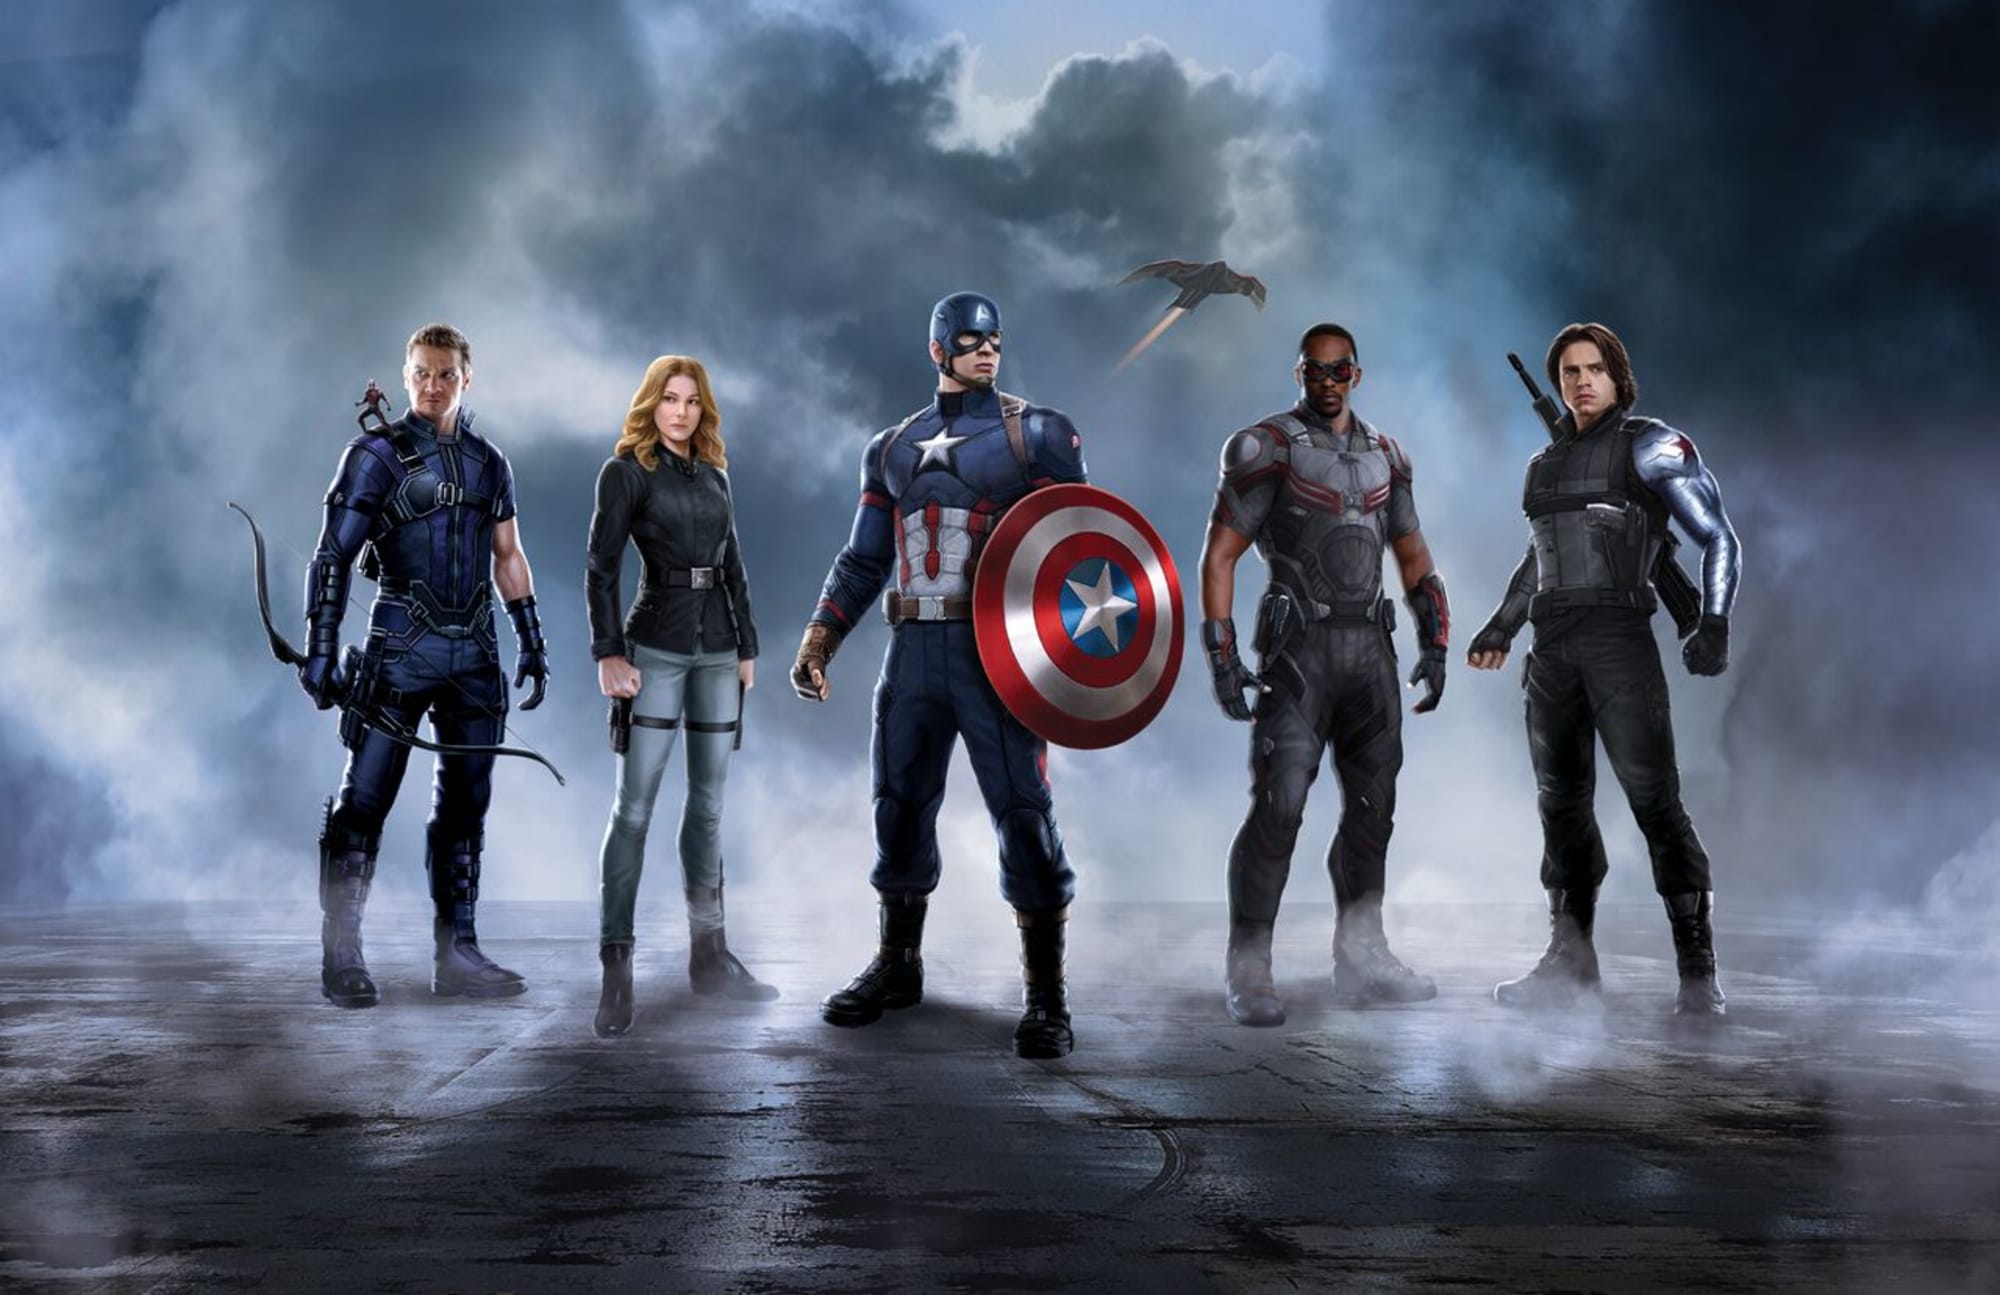 Who's on Team in Captain America: Civil War?